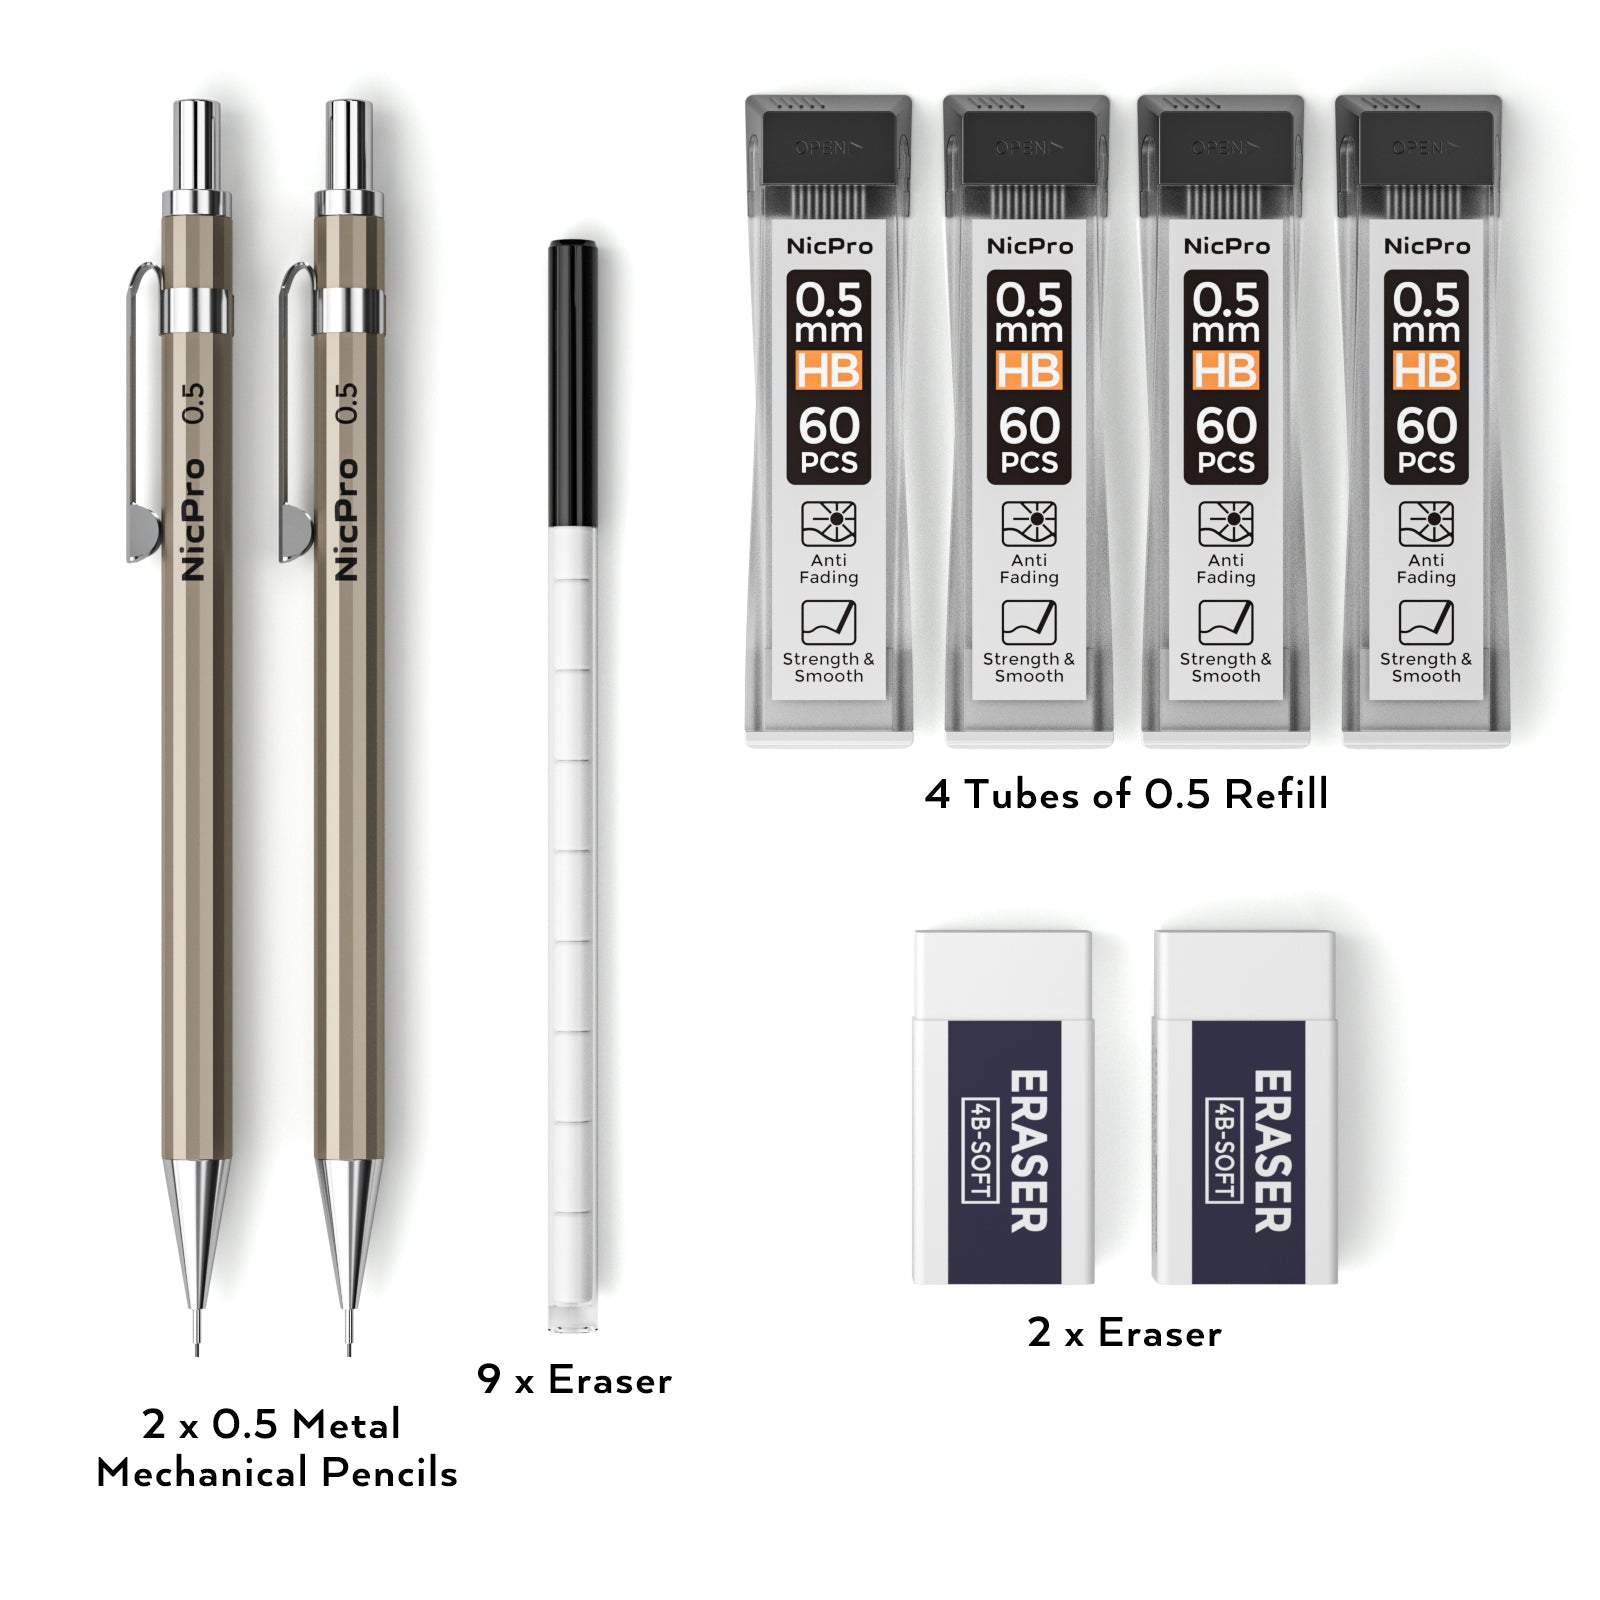 Metal 0.5 mm Mechanical Pencil Set with Case, 2 PCS Nicpro Drafting Pe